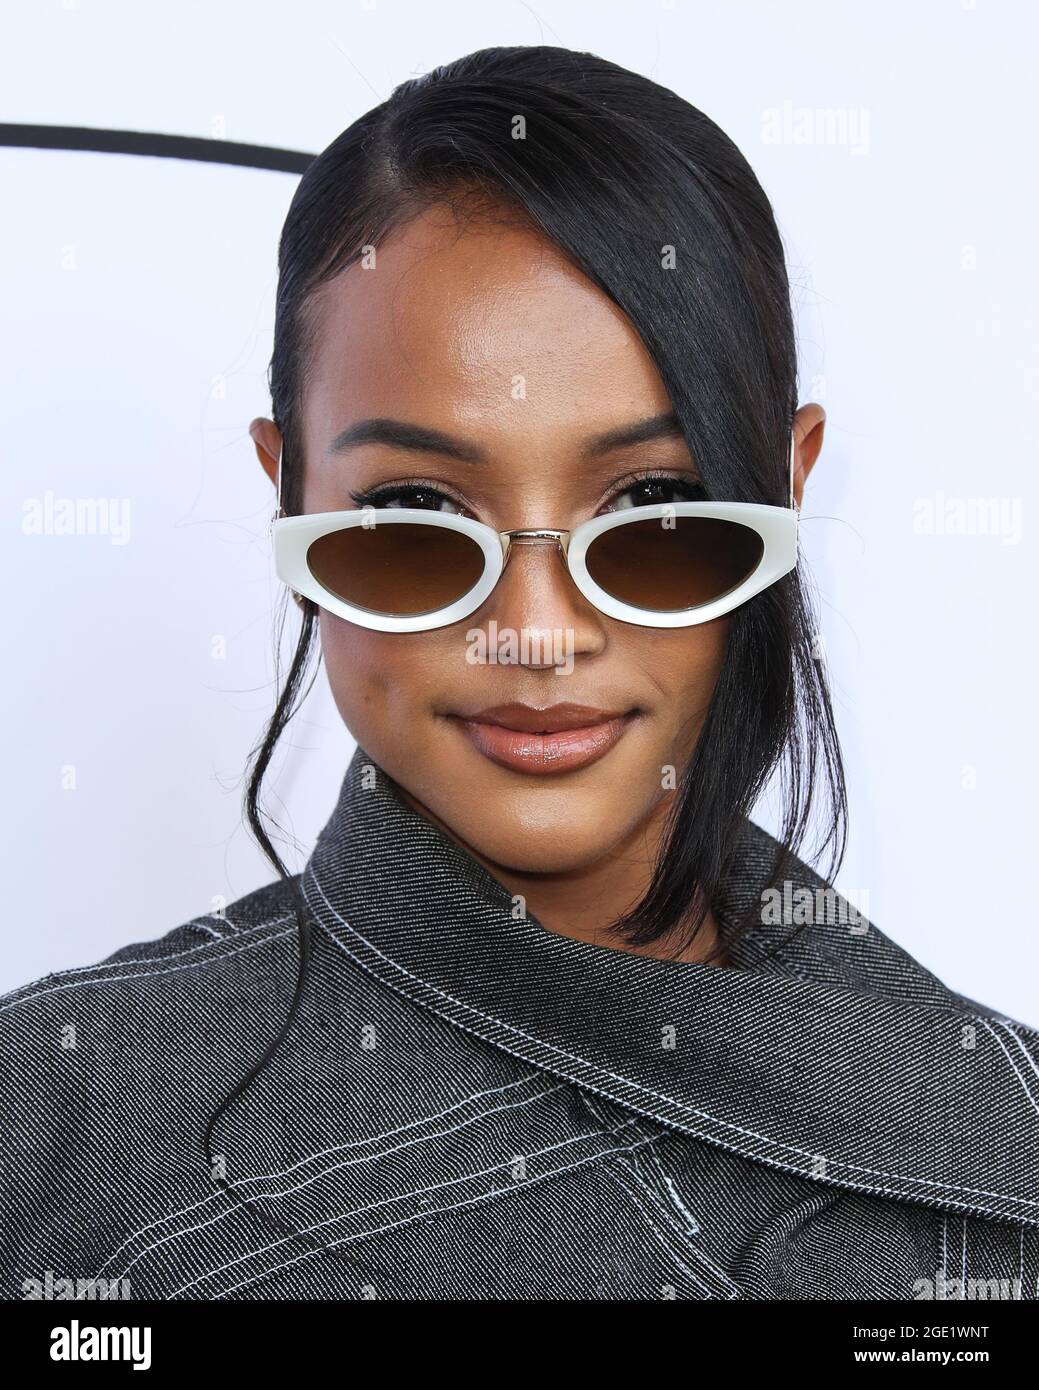 LOS ANGELES, CALIFORNIA, USA - AUGUST 15: Actress Karrueche Tran arrives at the Lionne Fall/Winter 2021 Fashion Show held at The Ebell on August 15, 2021 in Los Angeles, California, United States. (Photo by Xavier Collin/Image Press Agency) Stock Photo